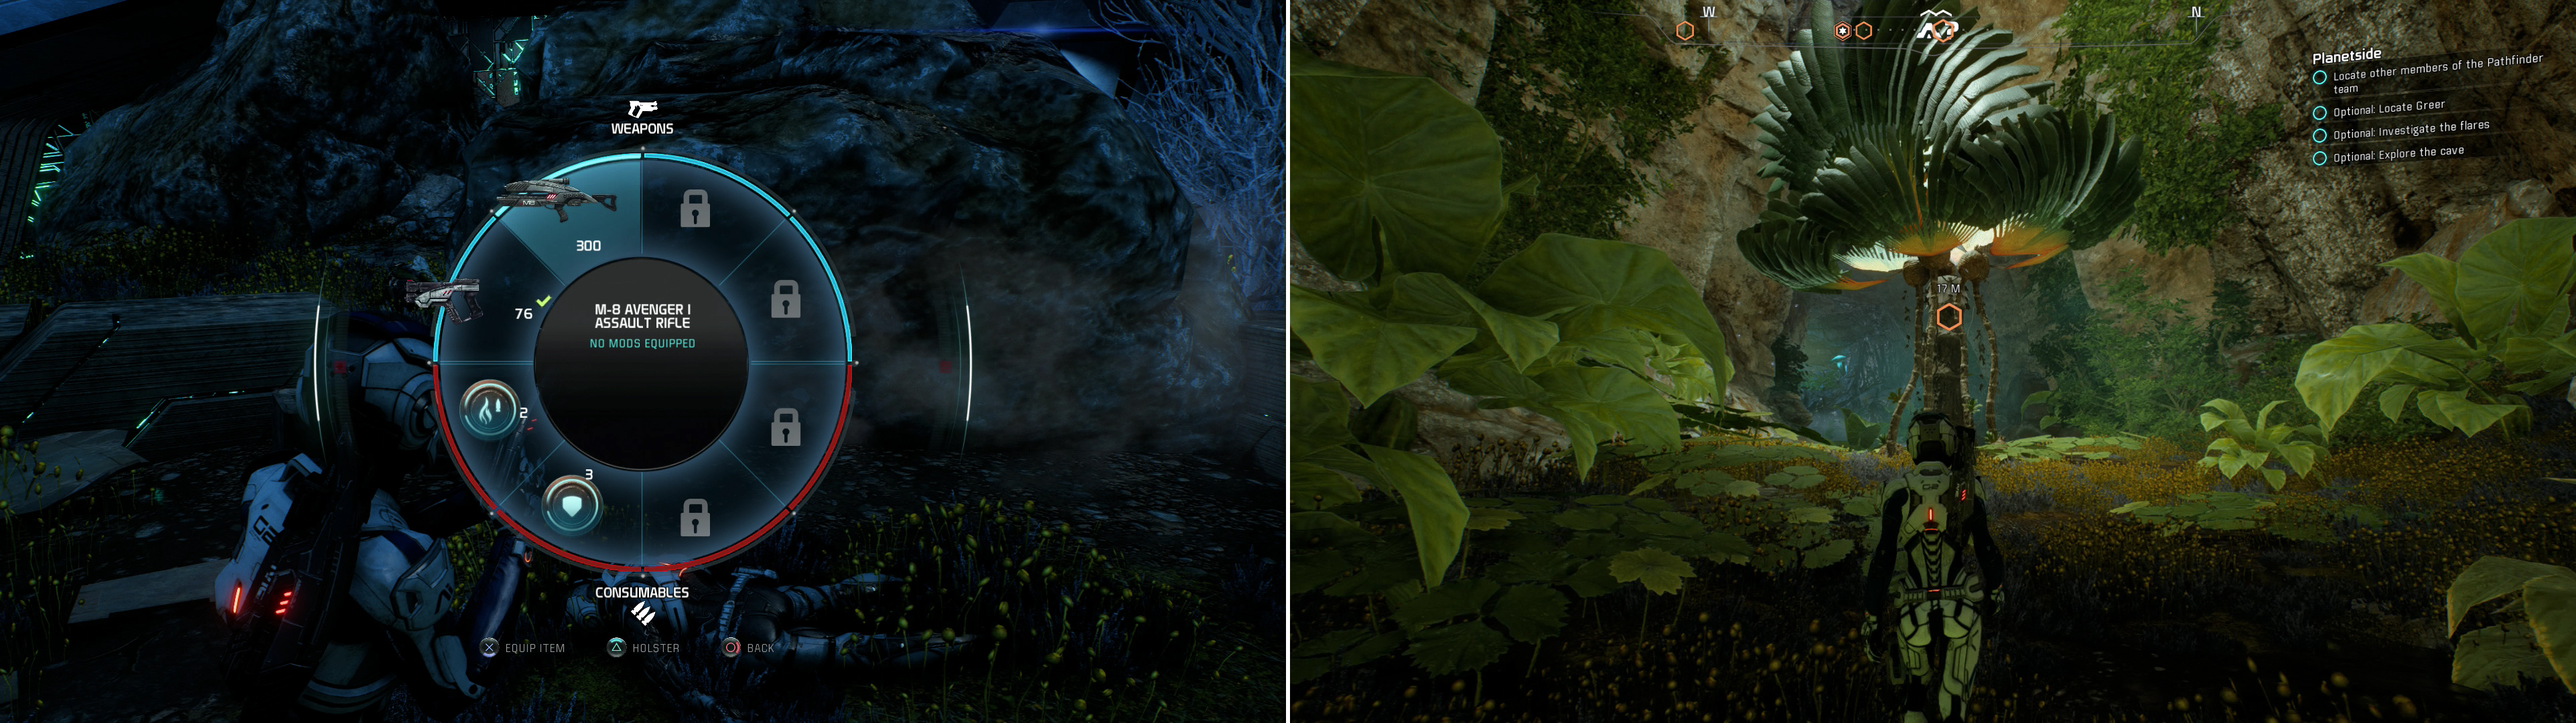 Search Kirkland's body for an M-8 Avenger Assault Rifle (left). In a sheltered cave you'll be able to catch a glimpse of Habitat 7 as it once was (right).